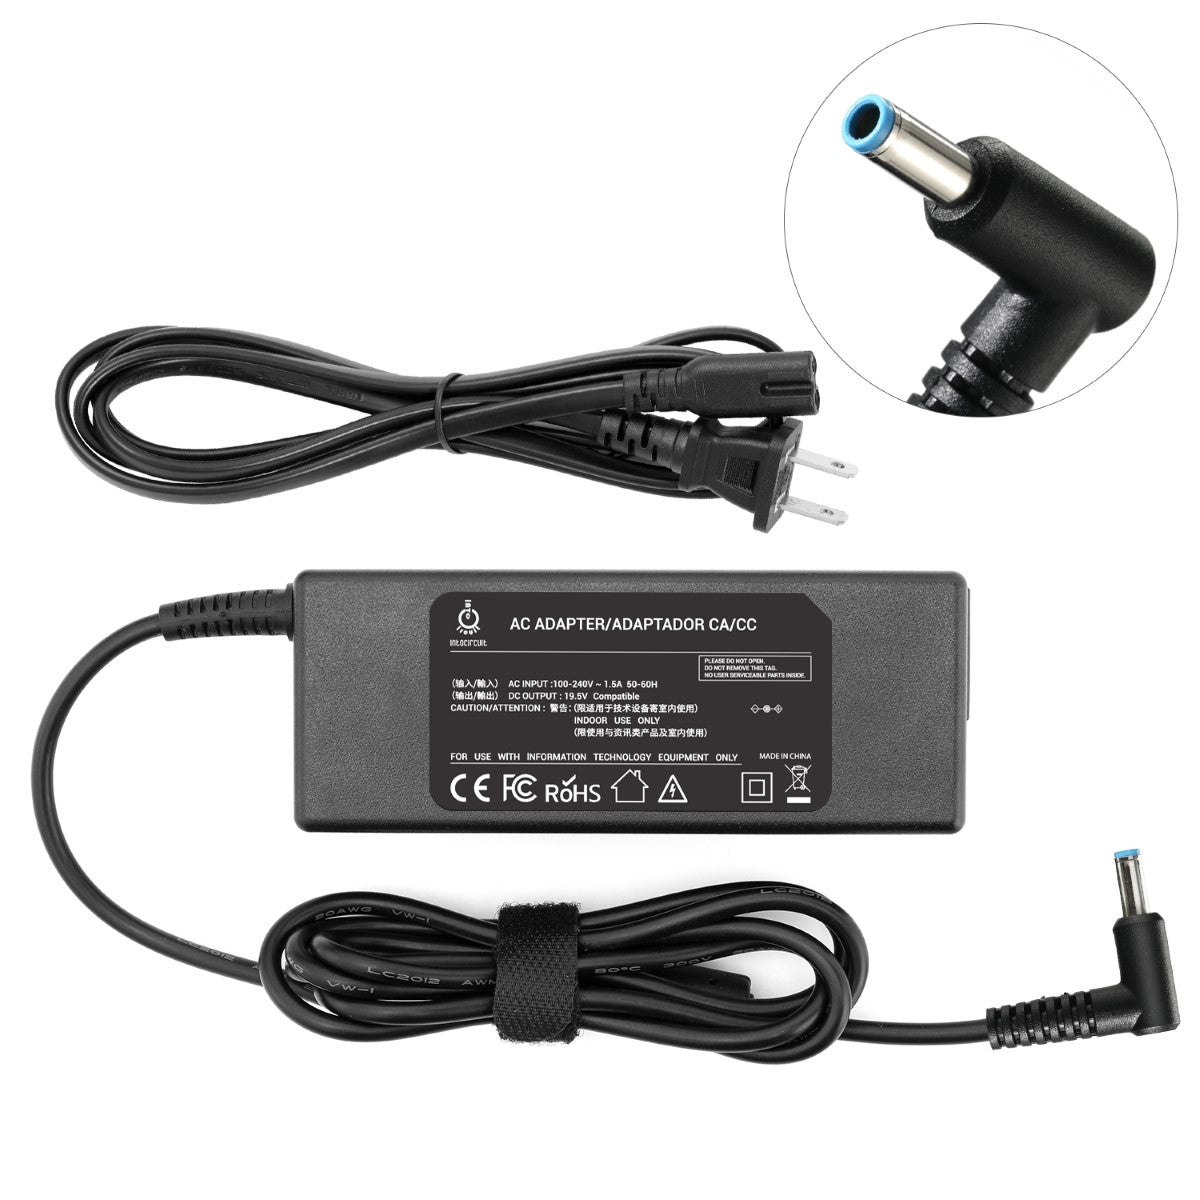 Charger for HP x360 310 G2 Laptop